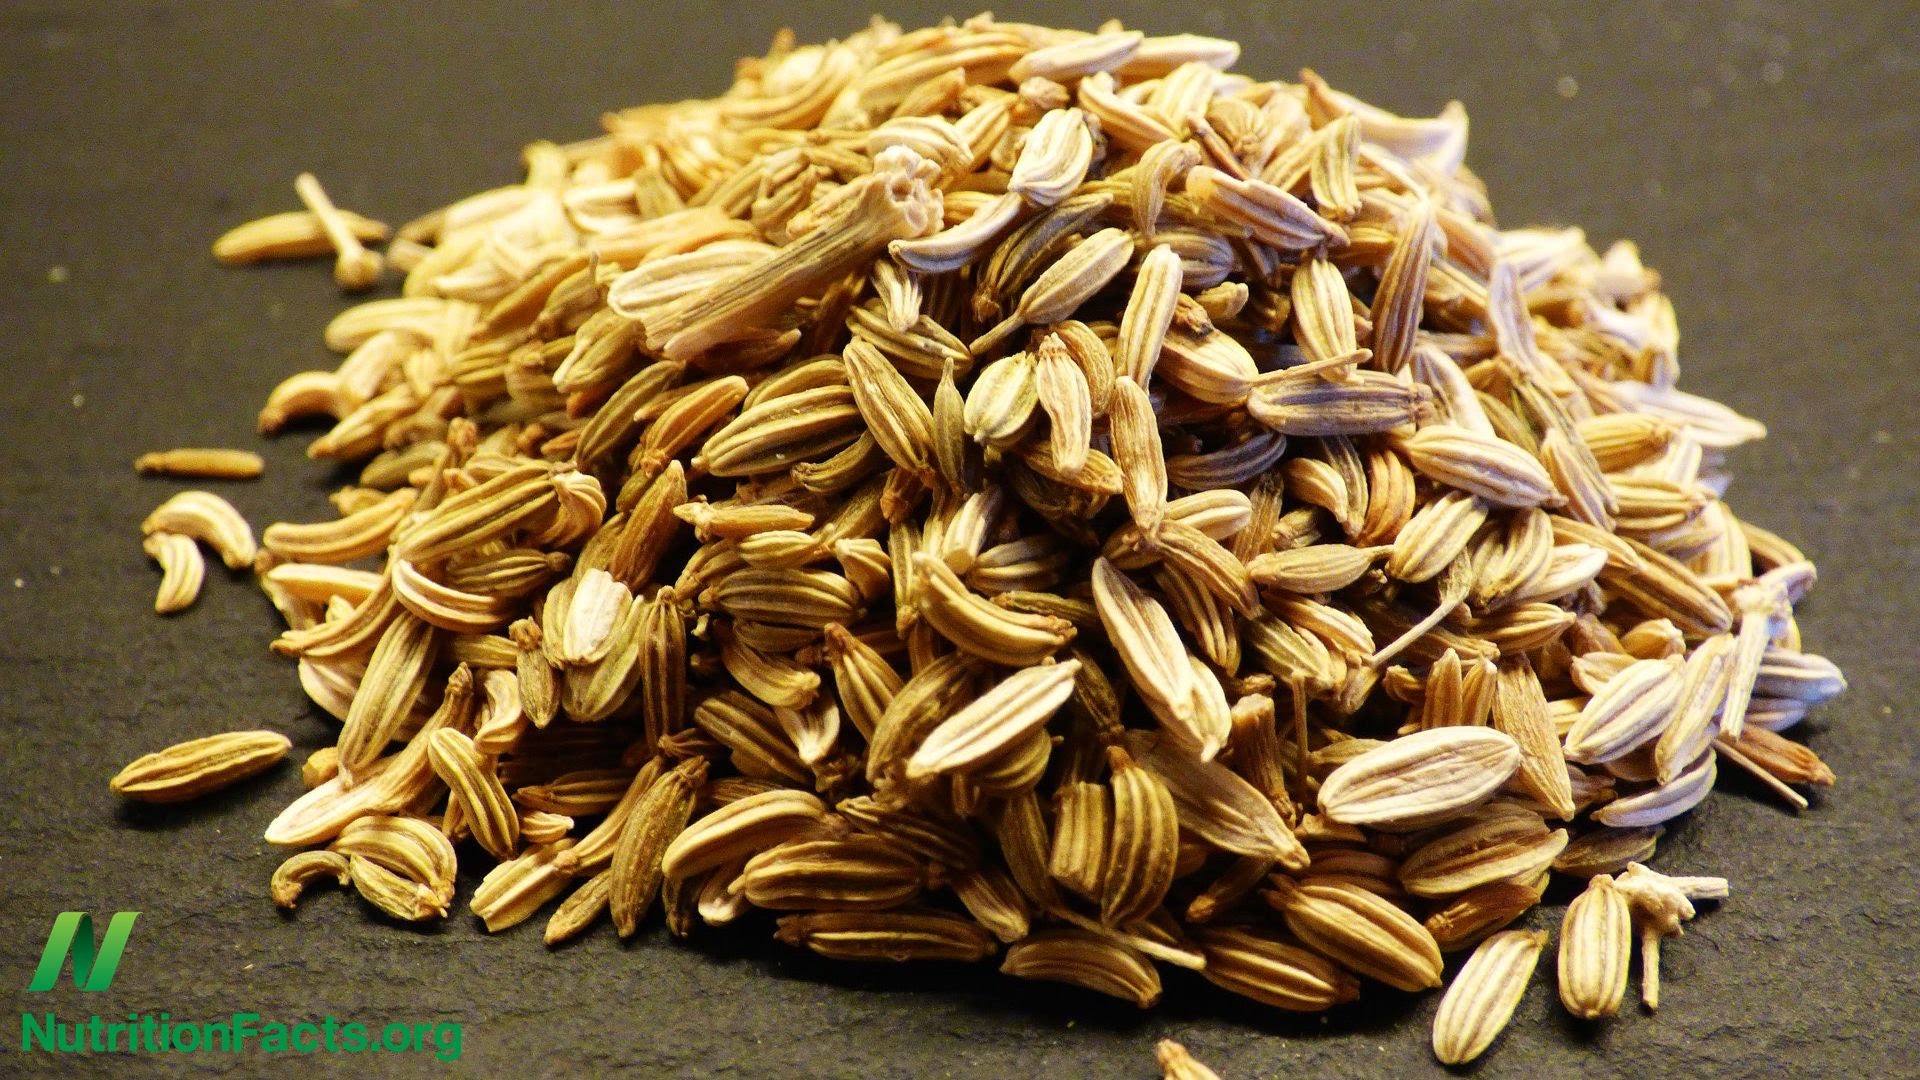 Fennel Seeds to Improve Athletic Performance - YouTube